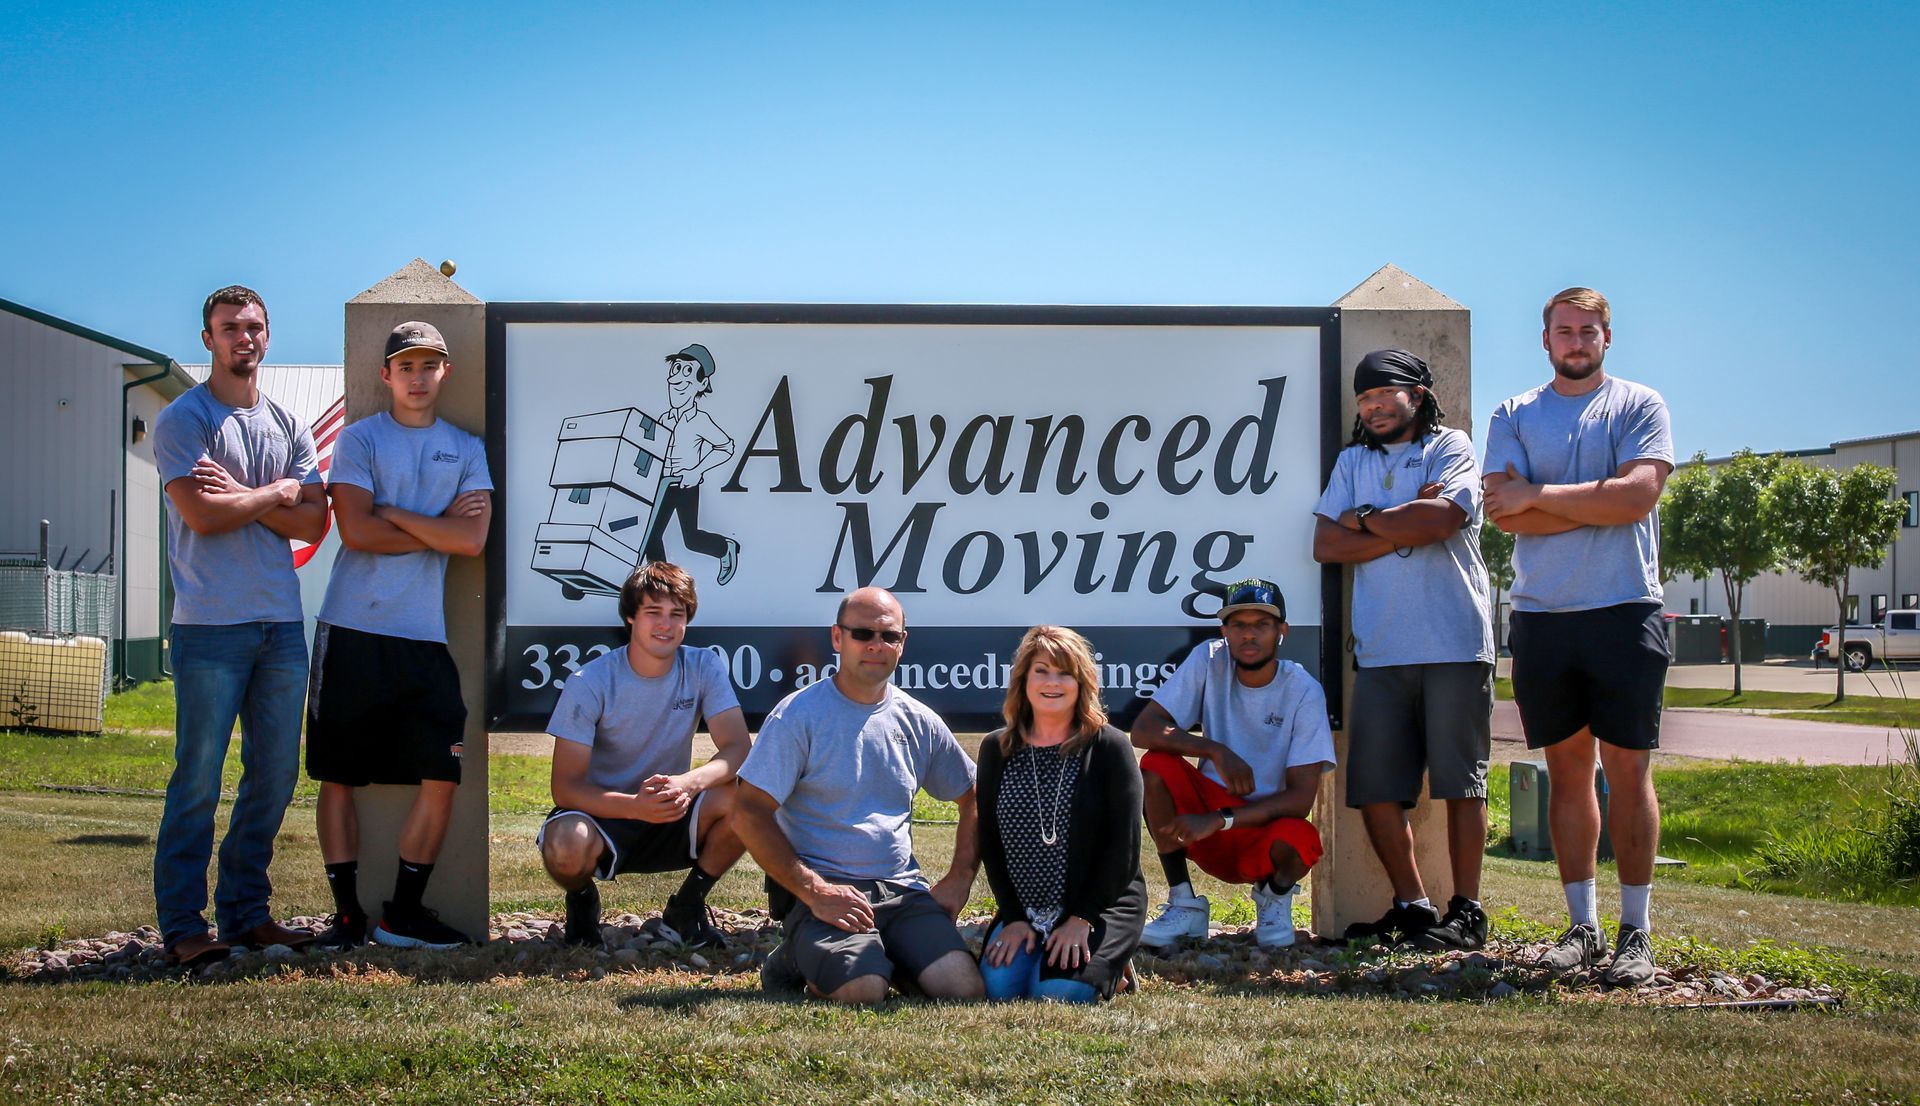 The experienced Advanced Moving team in Sioux Falls, South Dakota